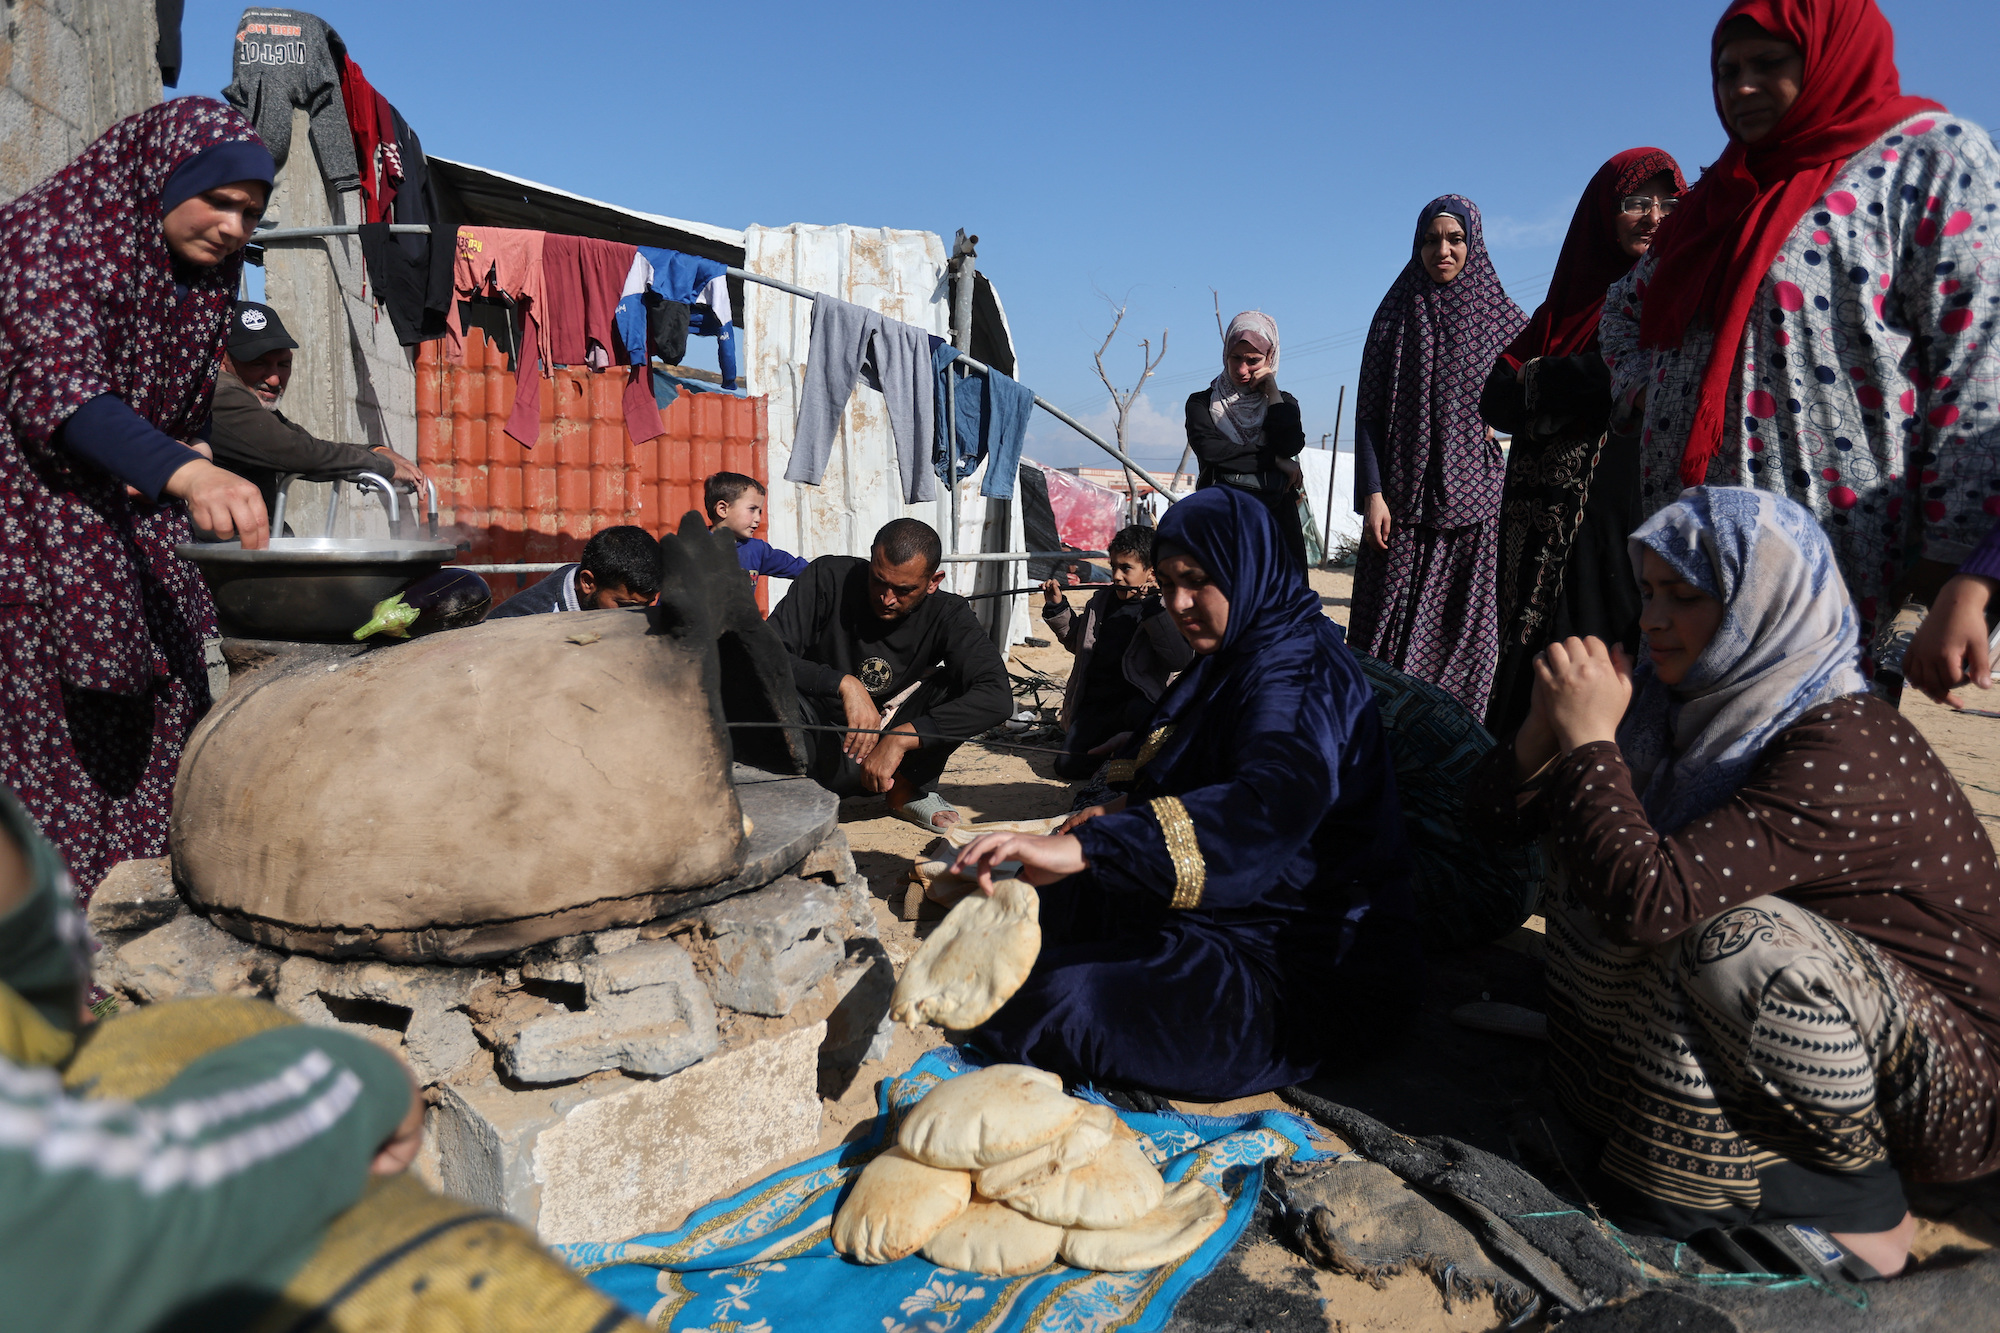 People wait while a woman prepares food in southern Gaza on Wednesday.